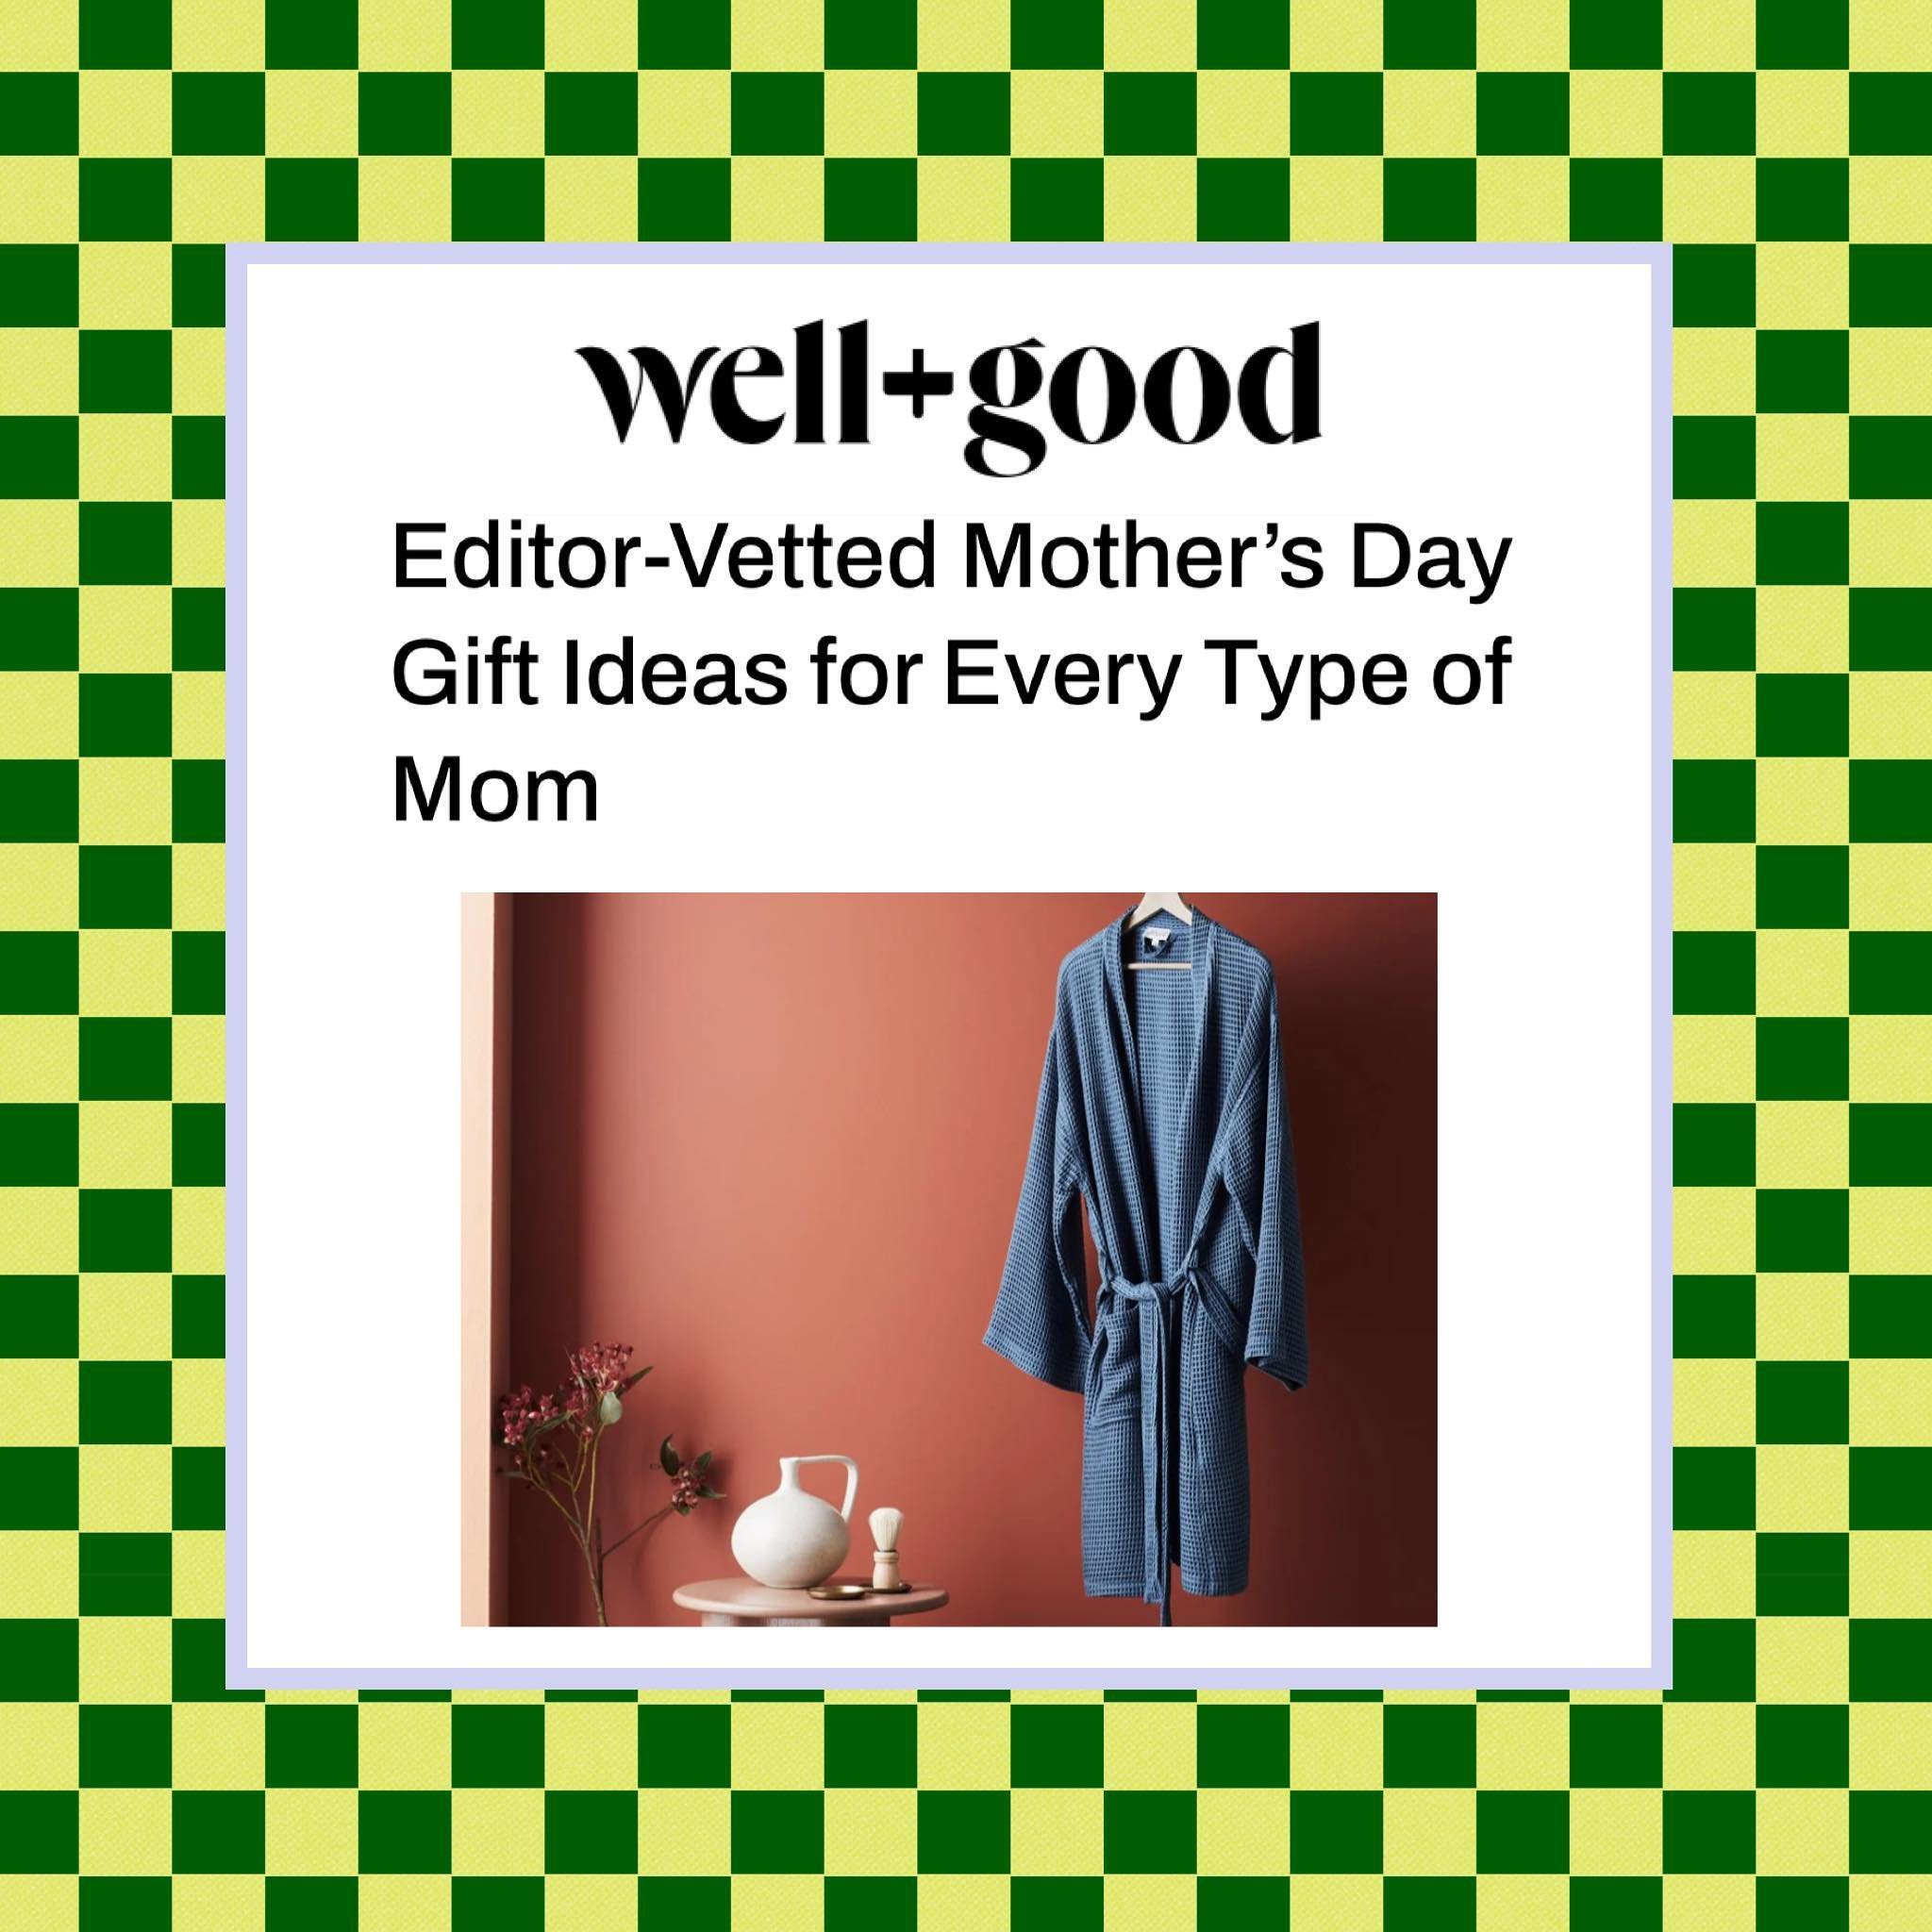 Ettitude in @iamwellandgood Editor-Vetted Mother&rsquo;s Day Gift Guide! Shout out to @jameyjpowell for loving the robe as much as we do!